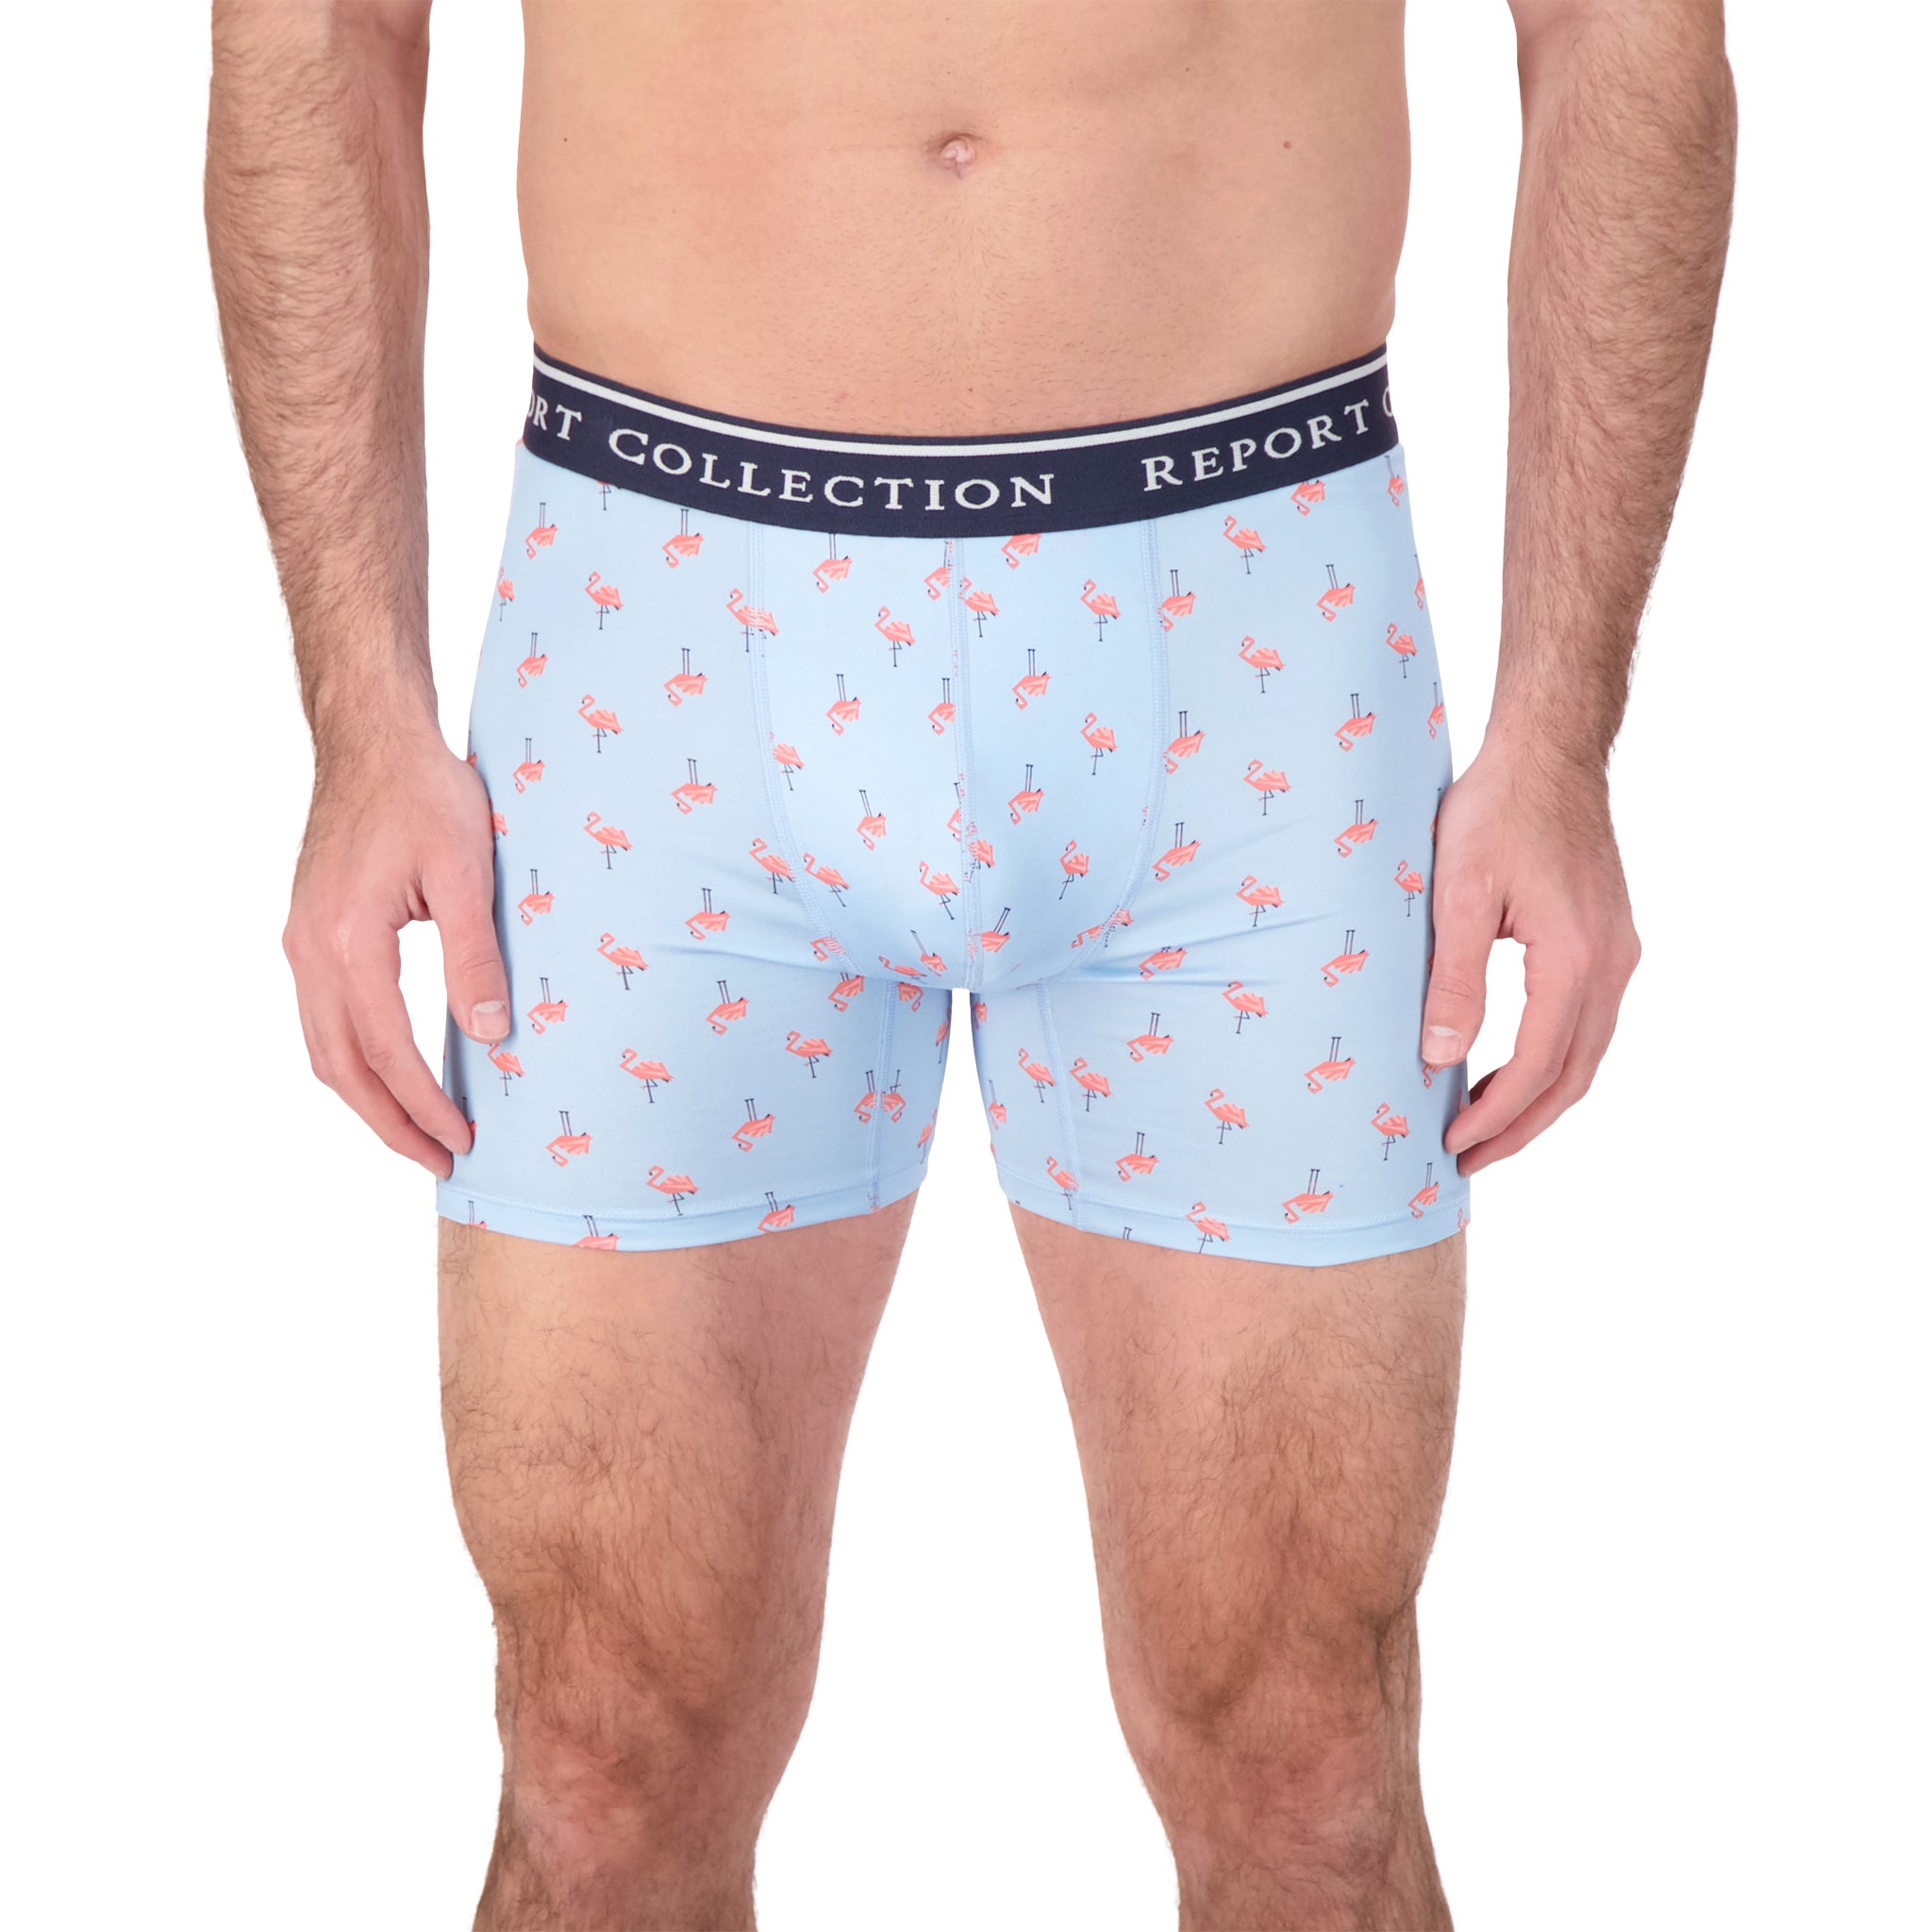 Boxer Underwear in Flamingo Print & Light Blue Report Collection